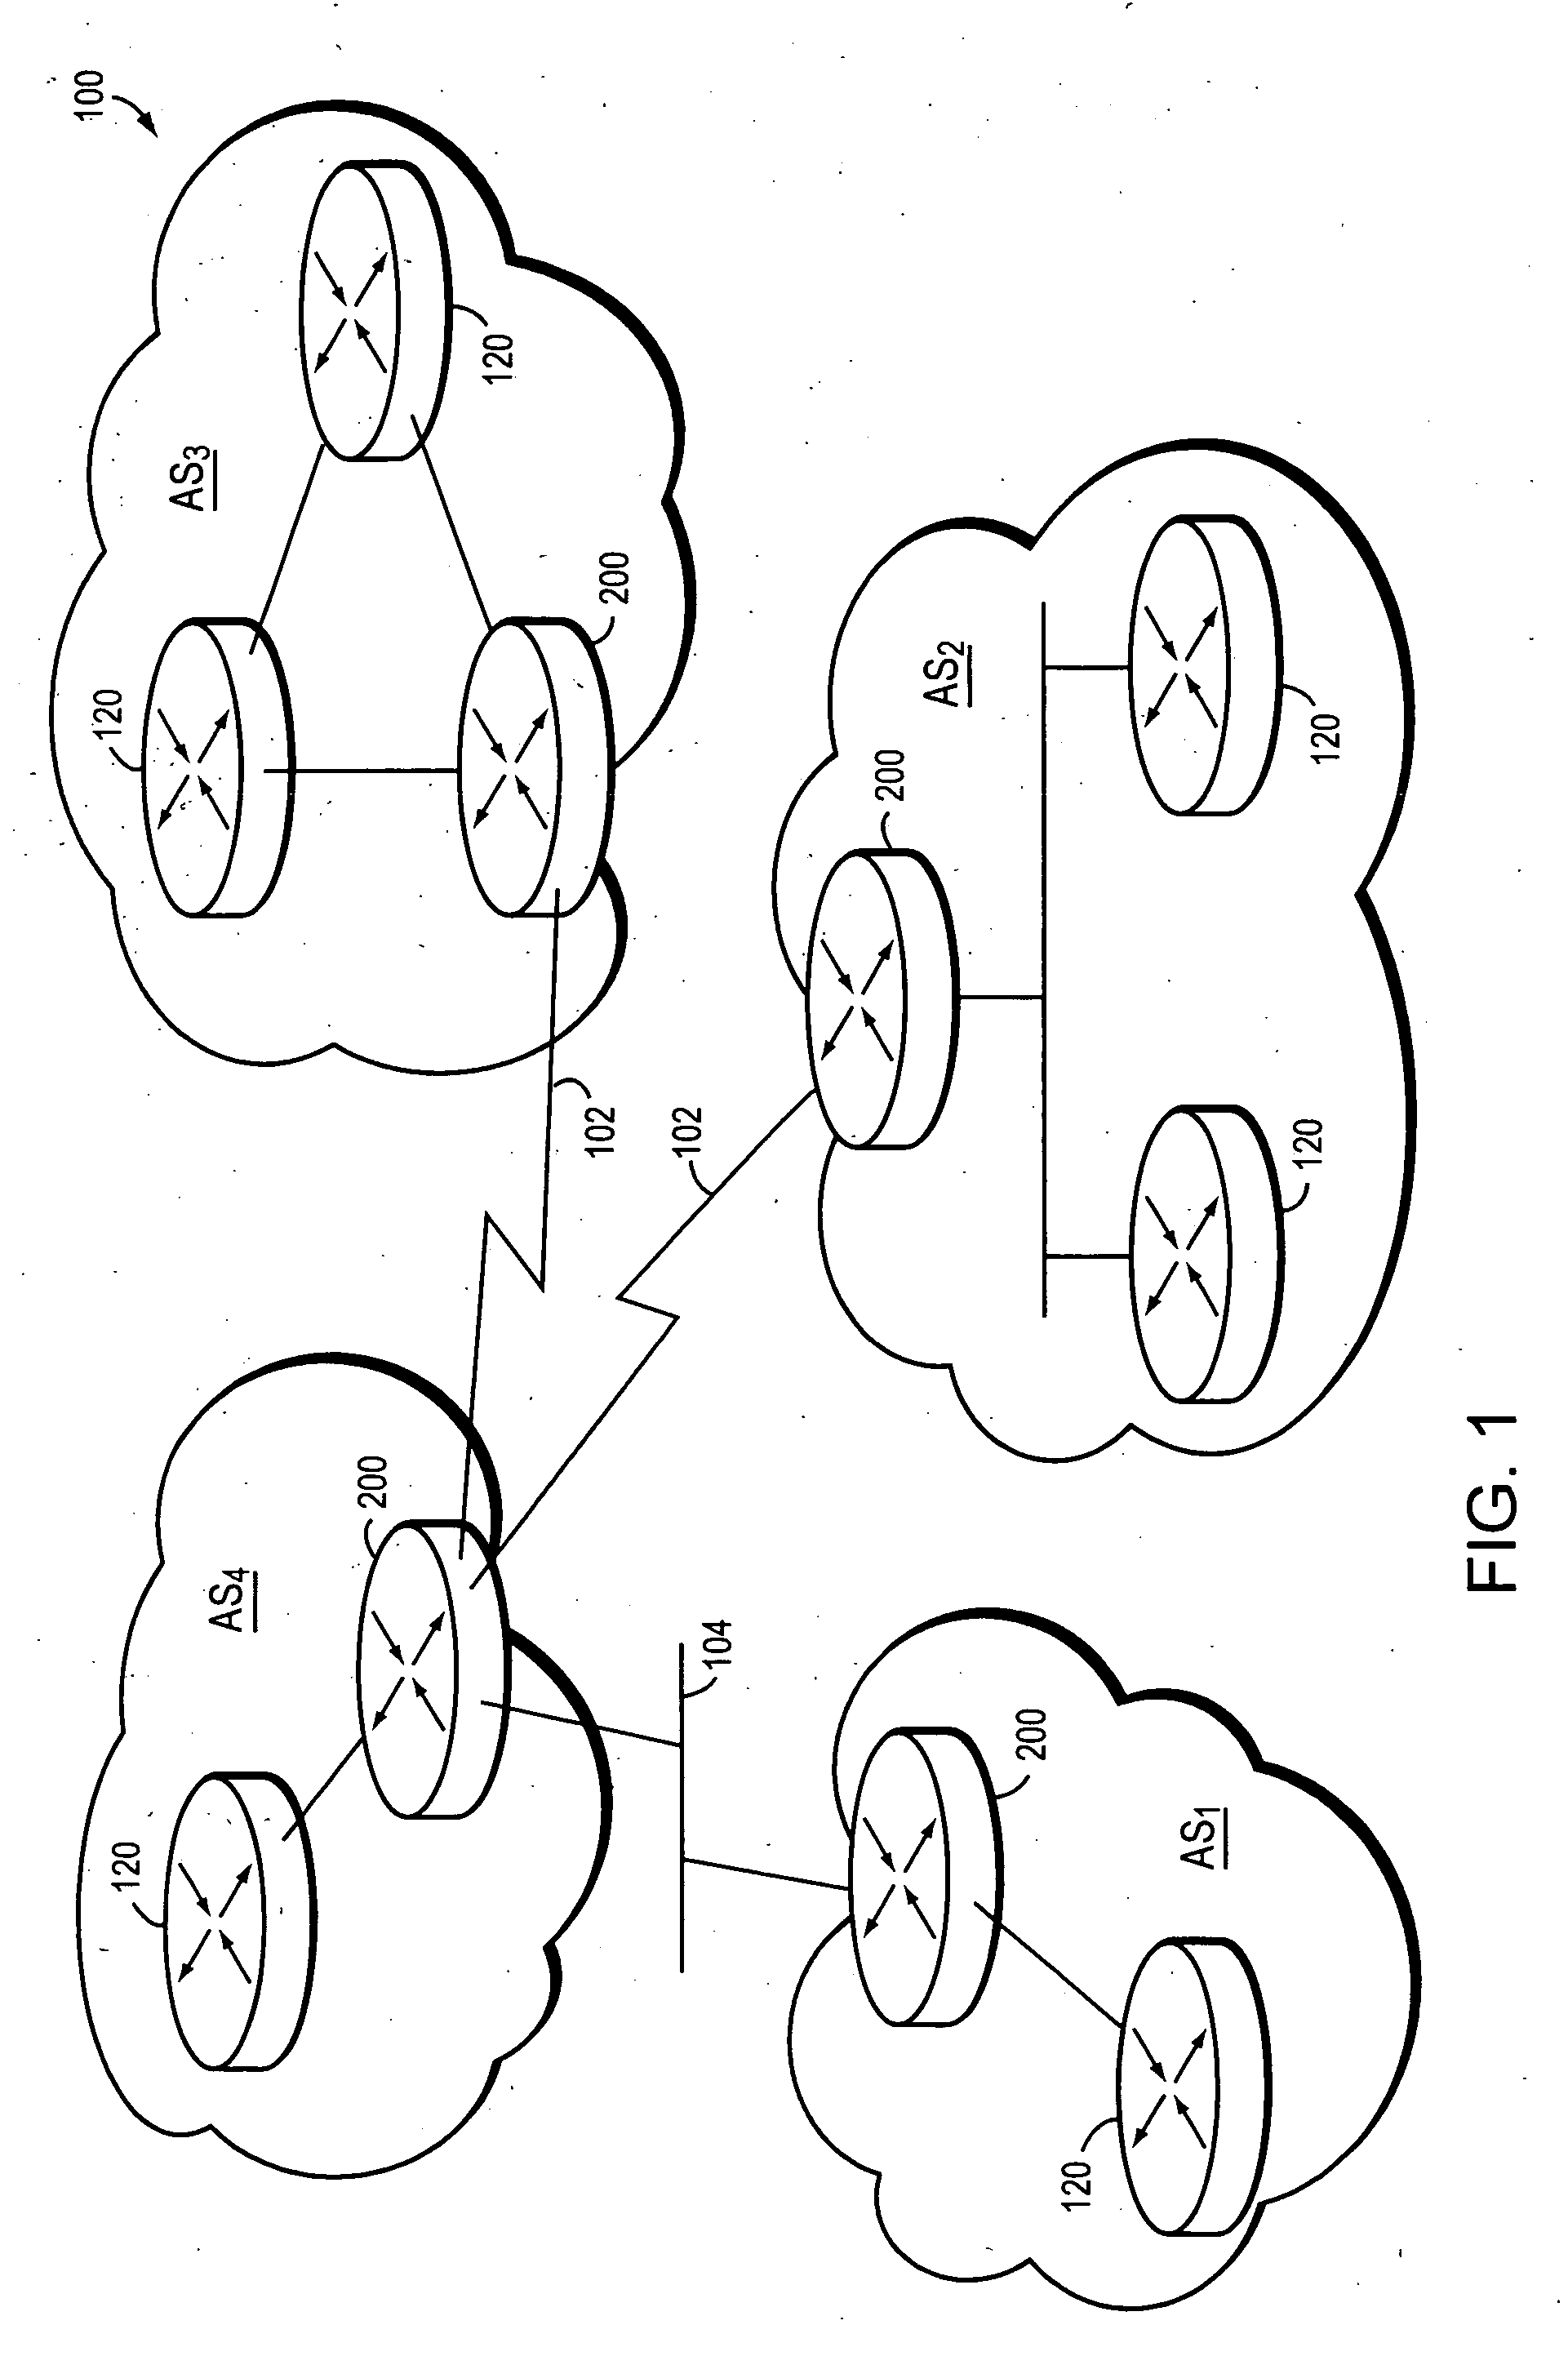 Network routing apparatus that performs soft graceful restart